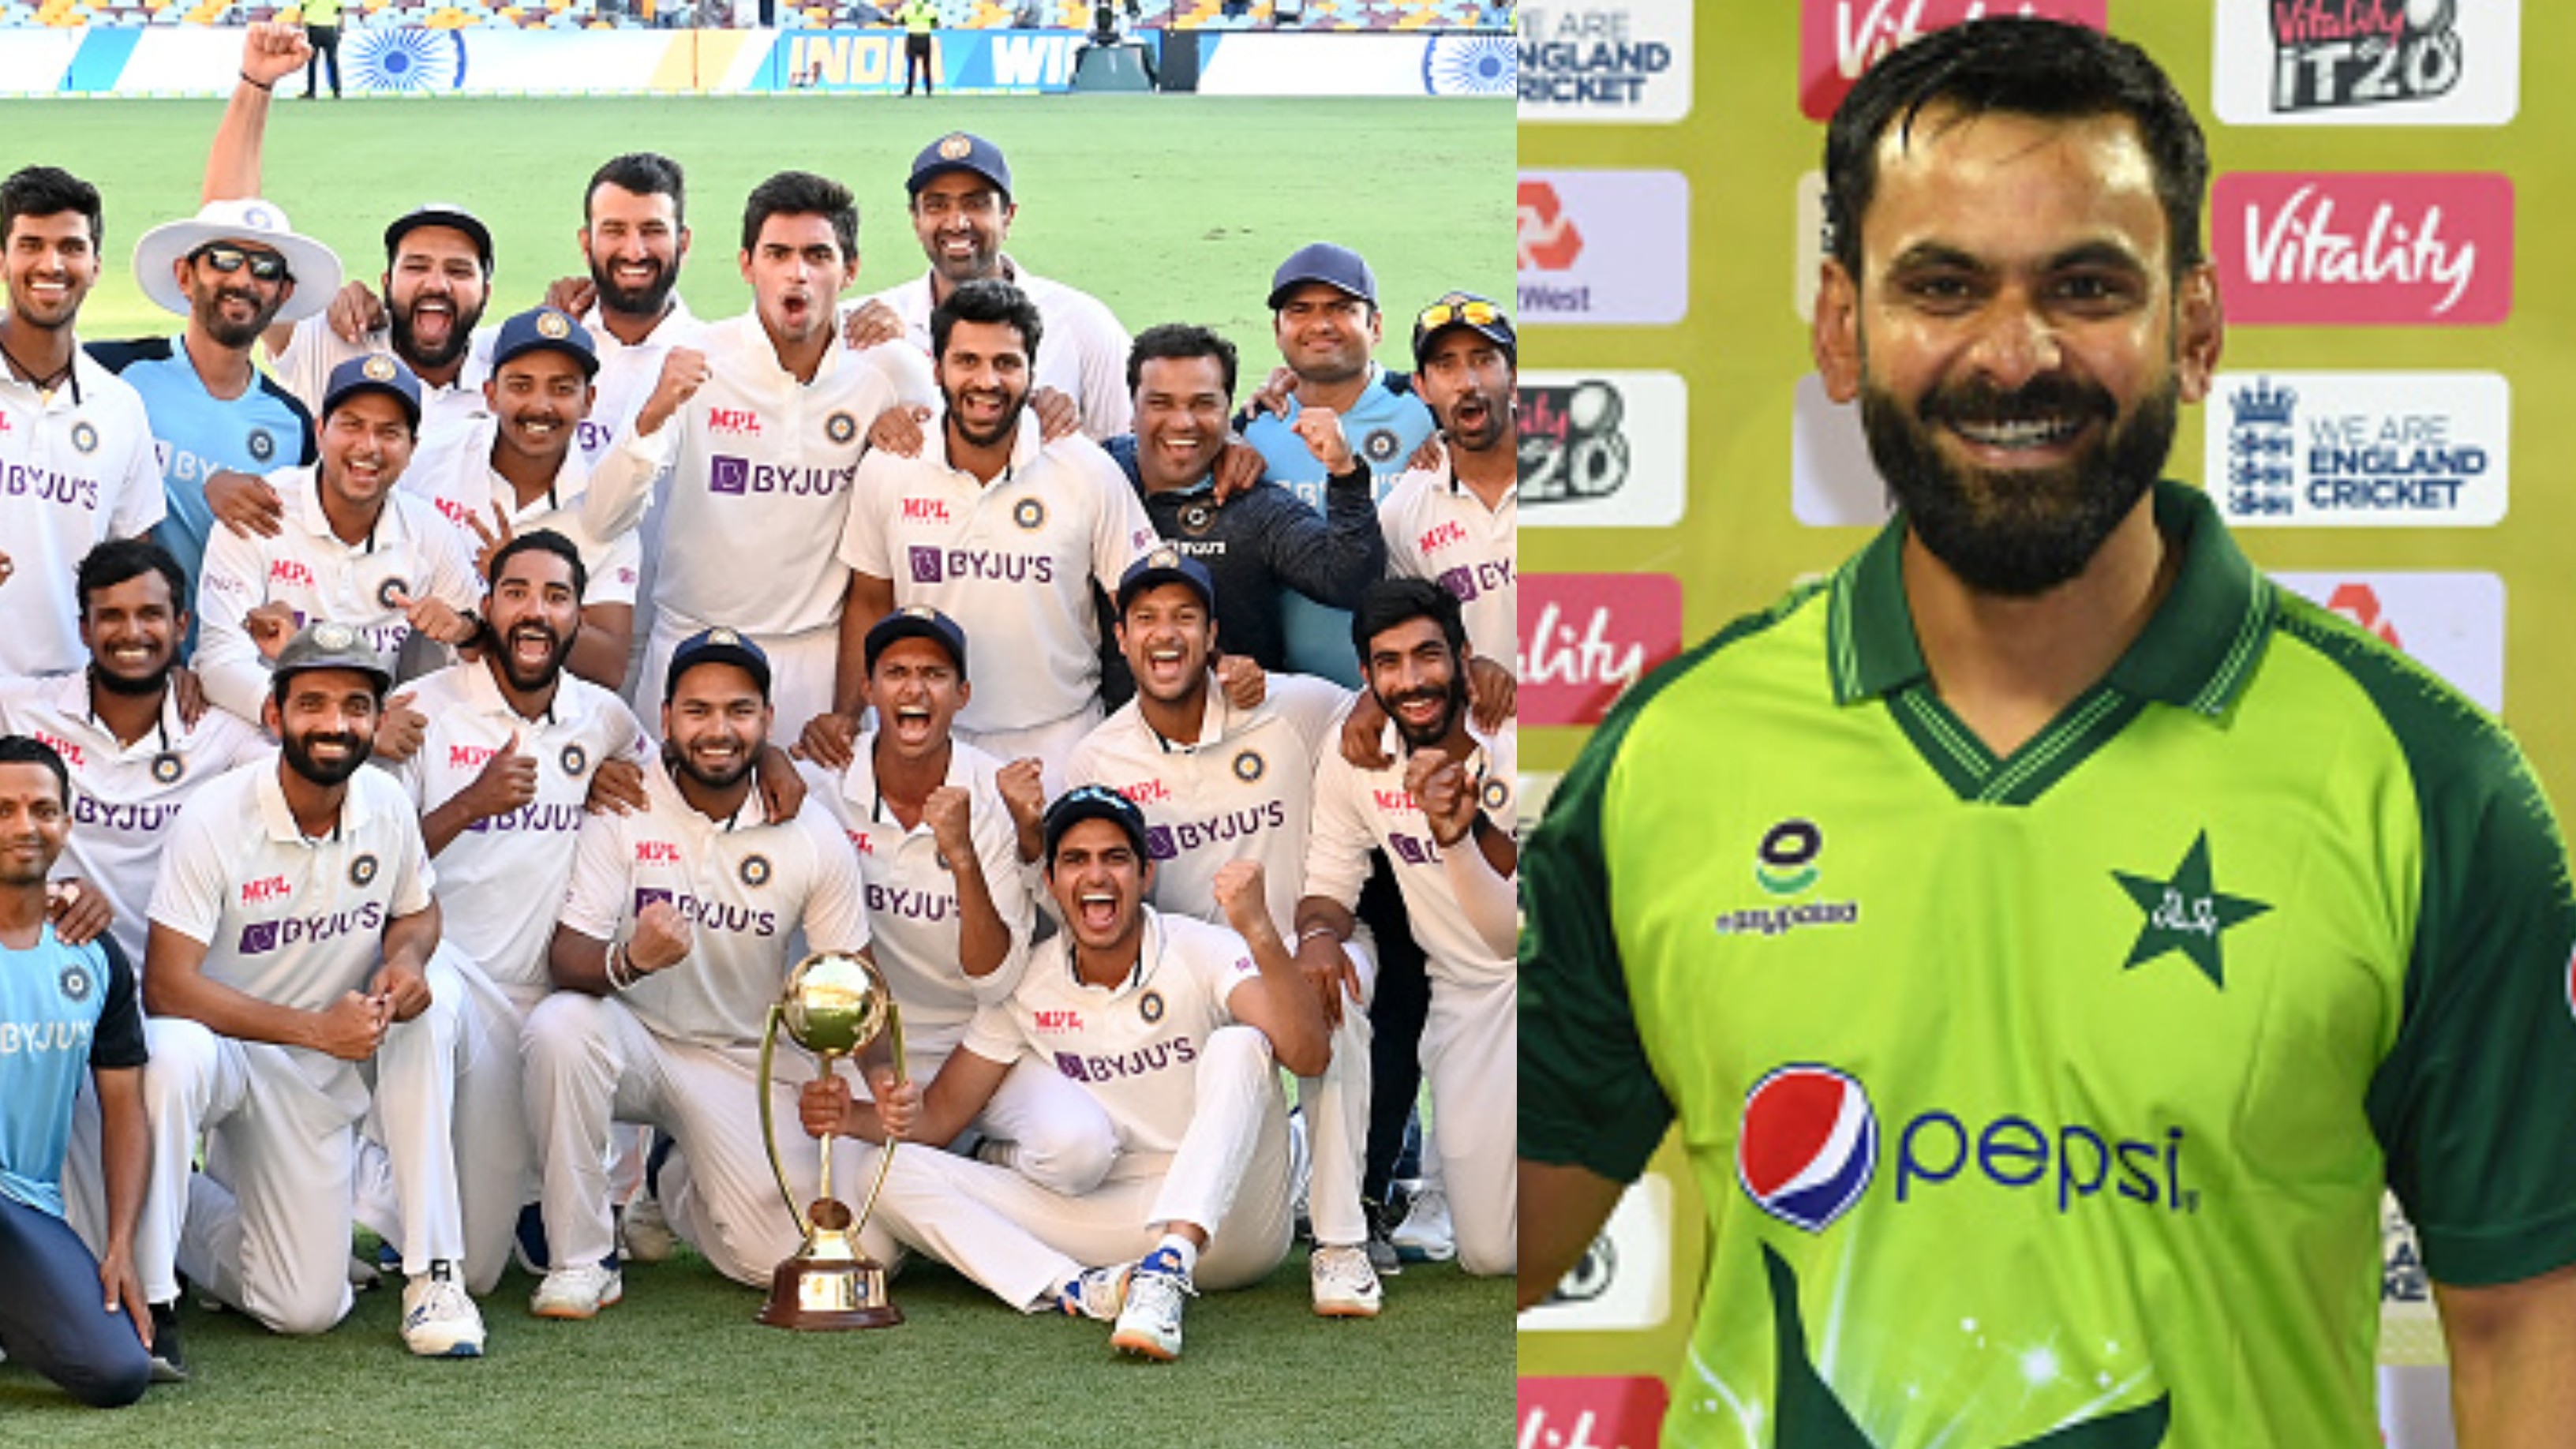 AUS v IND 2020-21: Mohammad Hafeez says India won because of their proper system for grooming talent